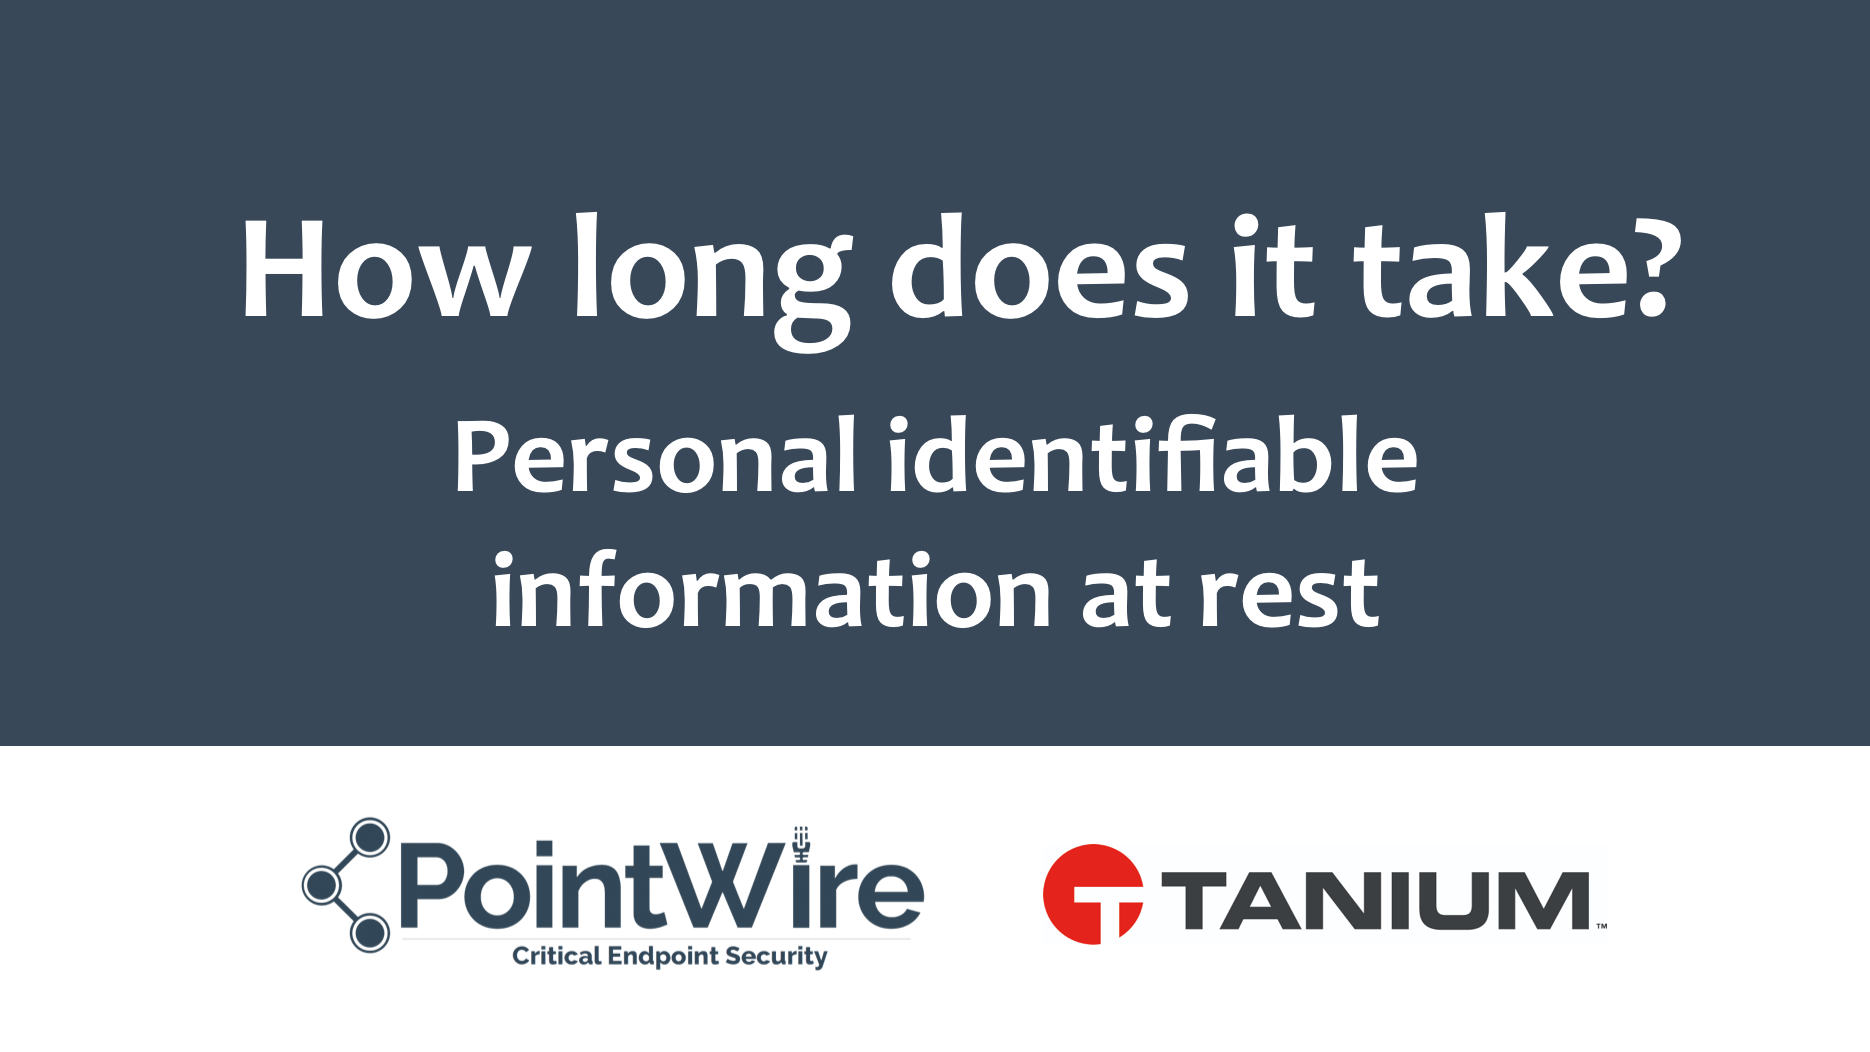 How long does it take? To find personal identifiable information at rest